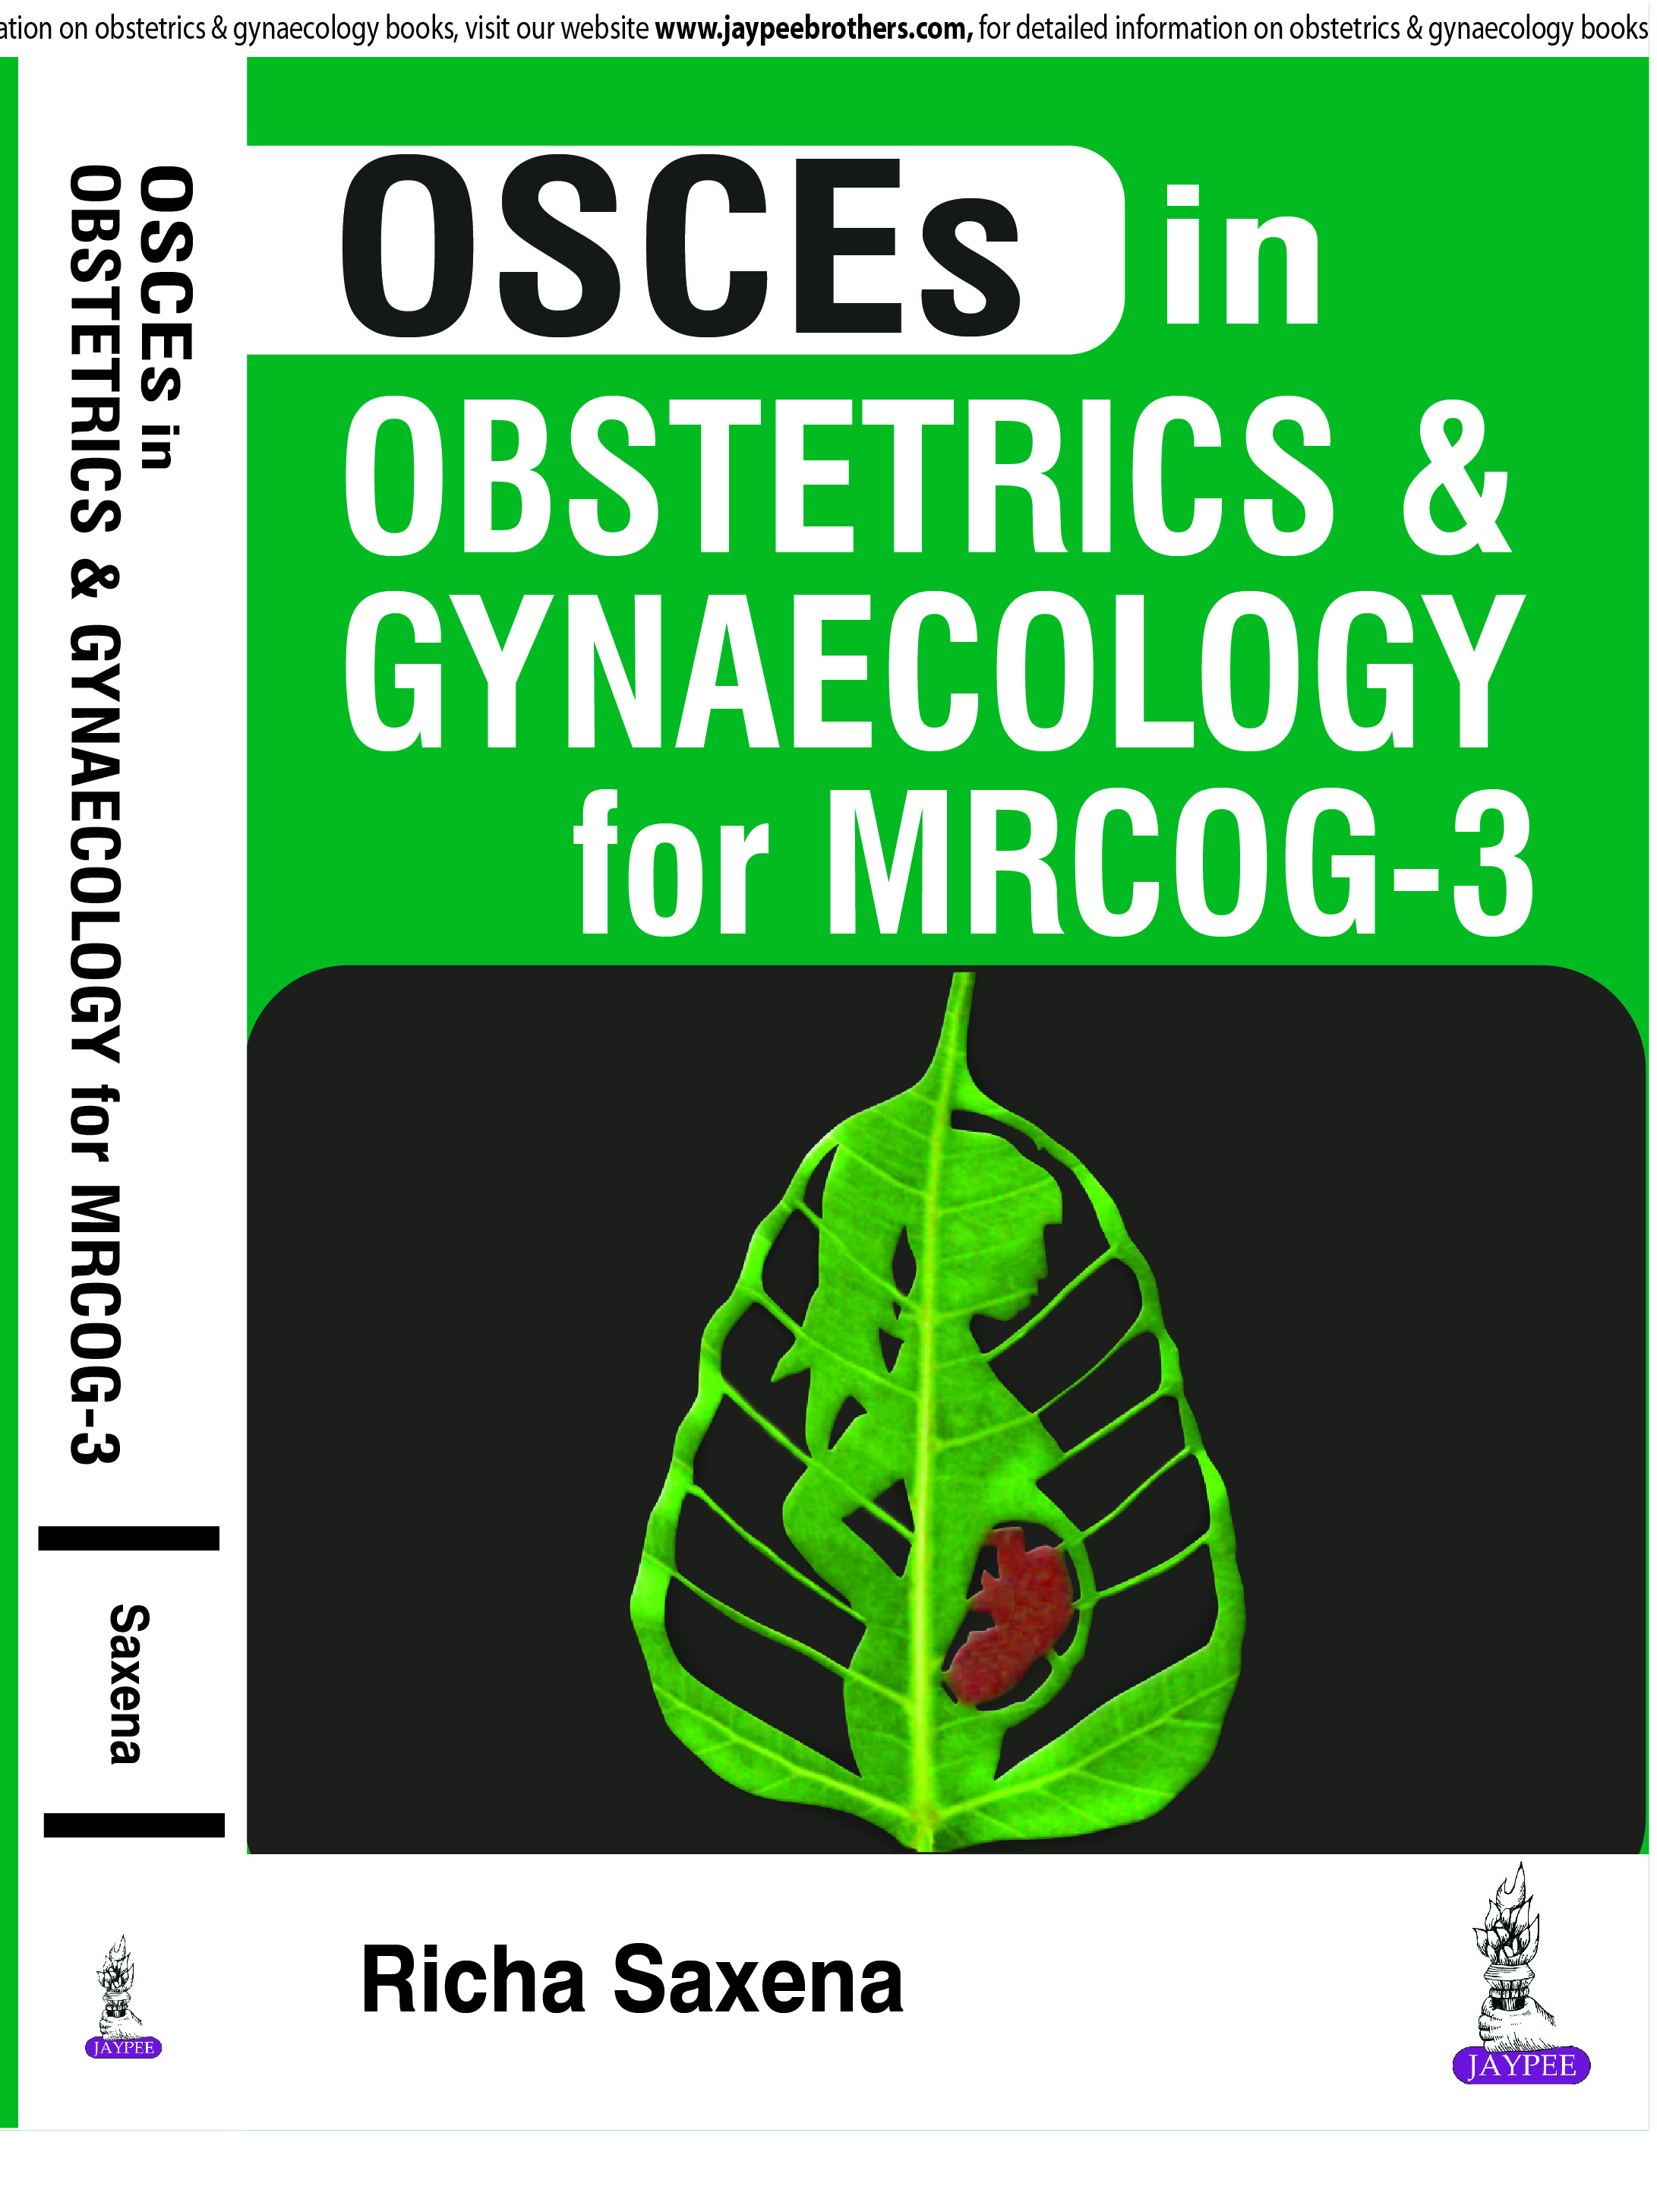 OSCES in Obstetrics and Gynaecology for MRCOG3